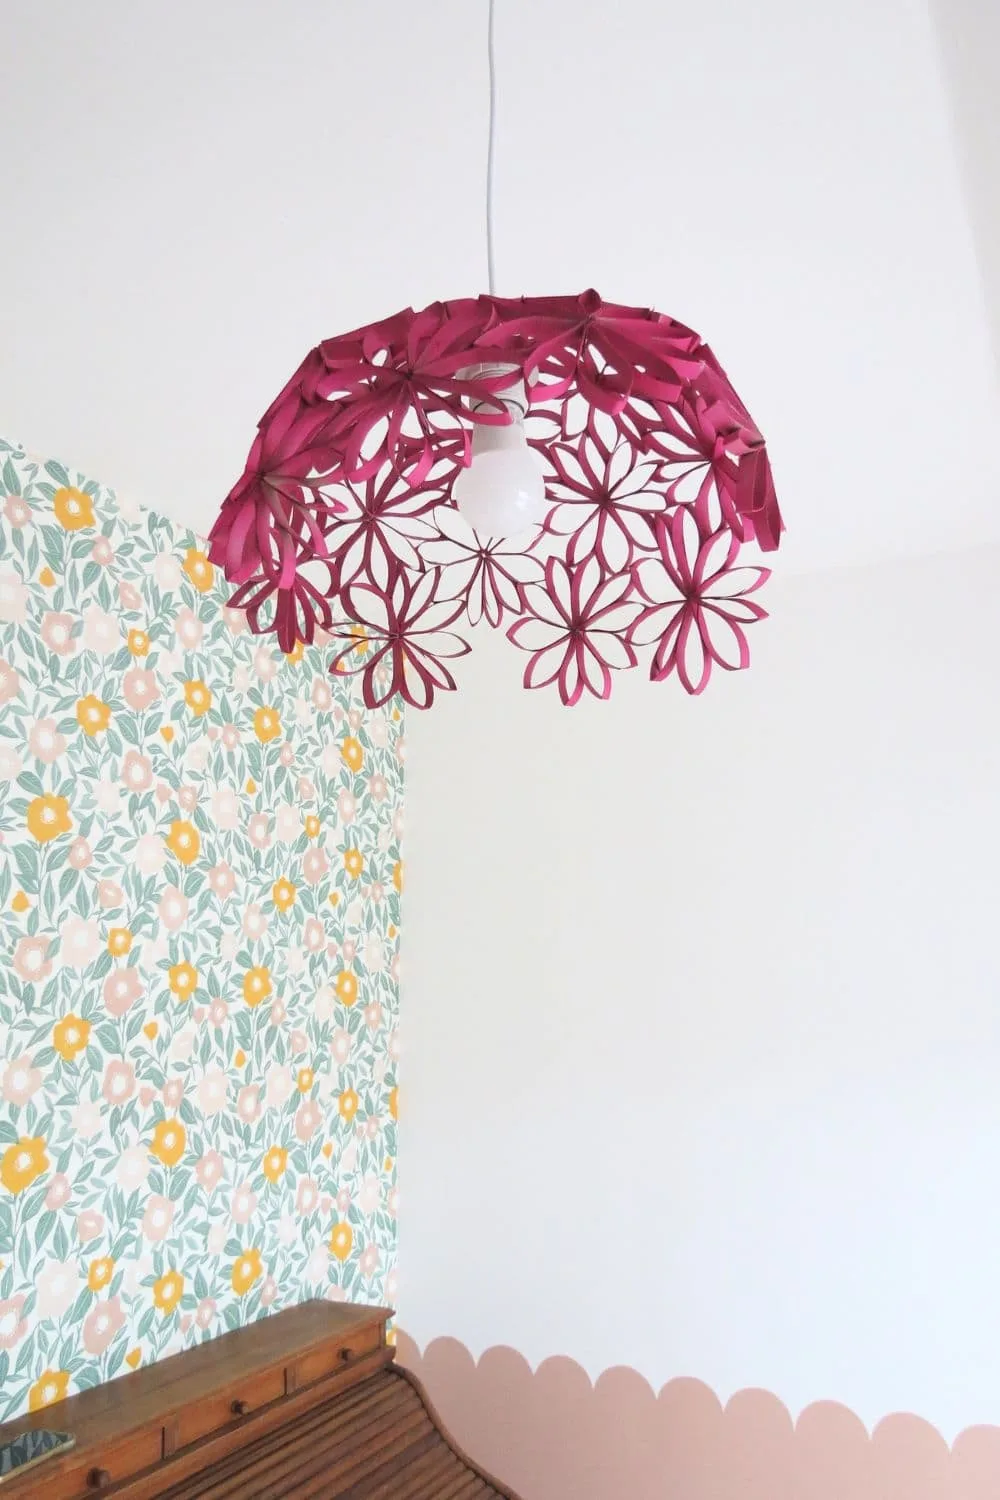 recycled lampshade with toilet paper rolls